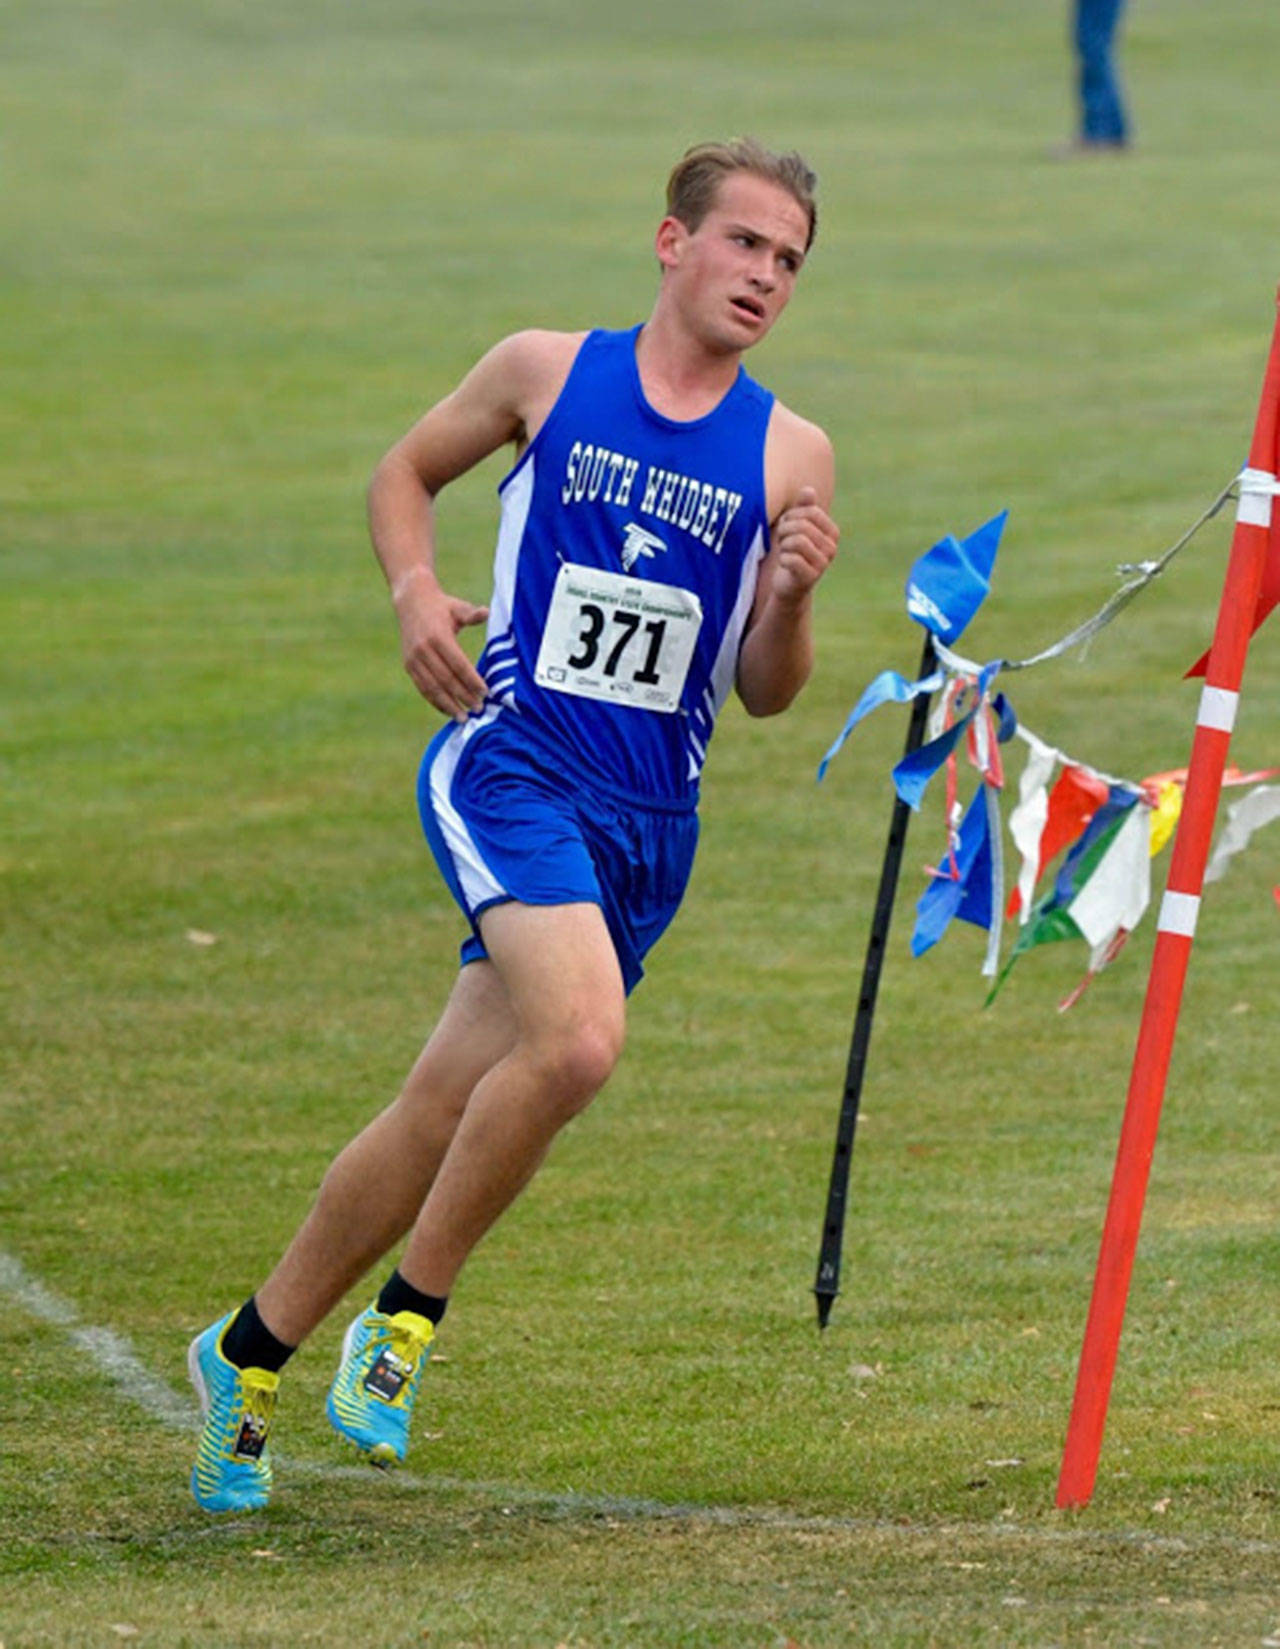 Michael Harwell competes in last year’s state cross country meet. (Photo by Karen Swegler)